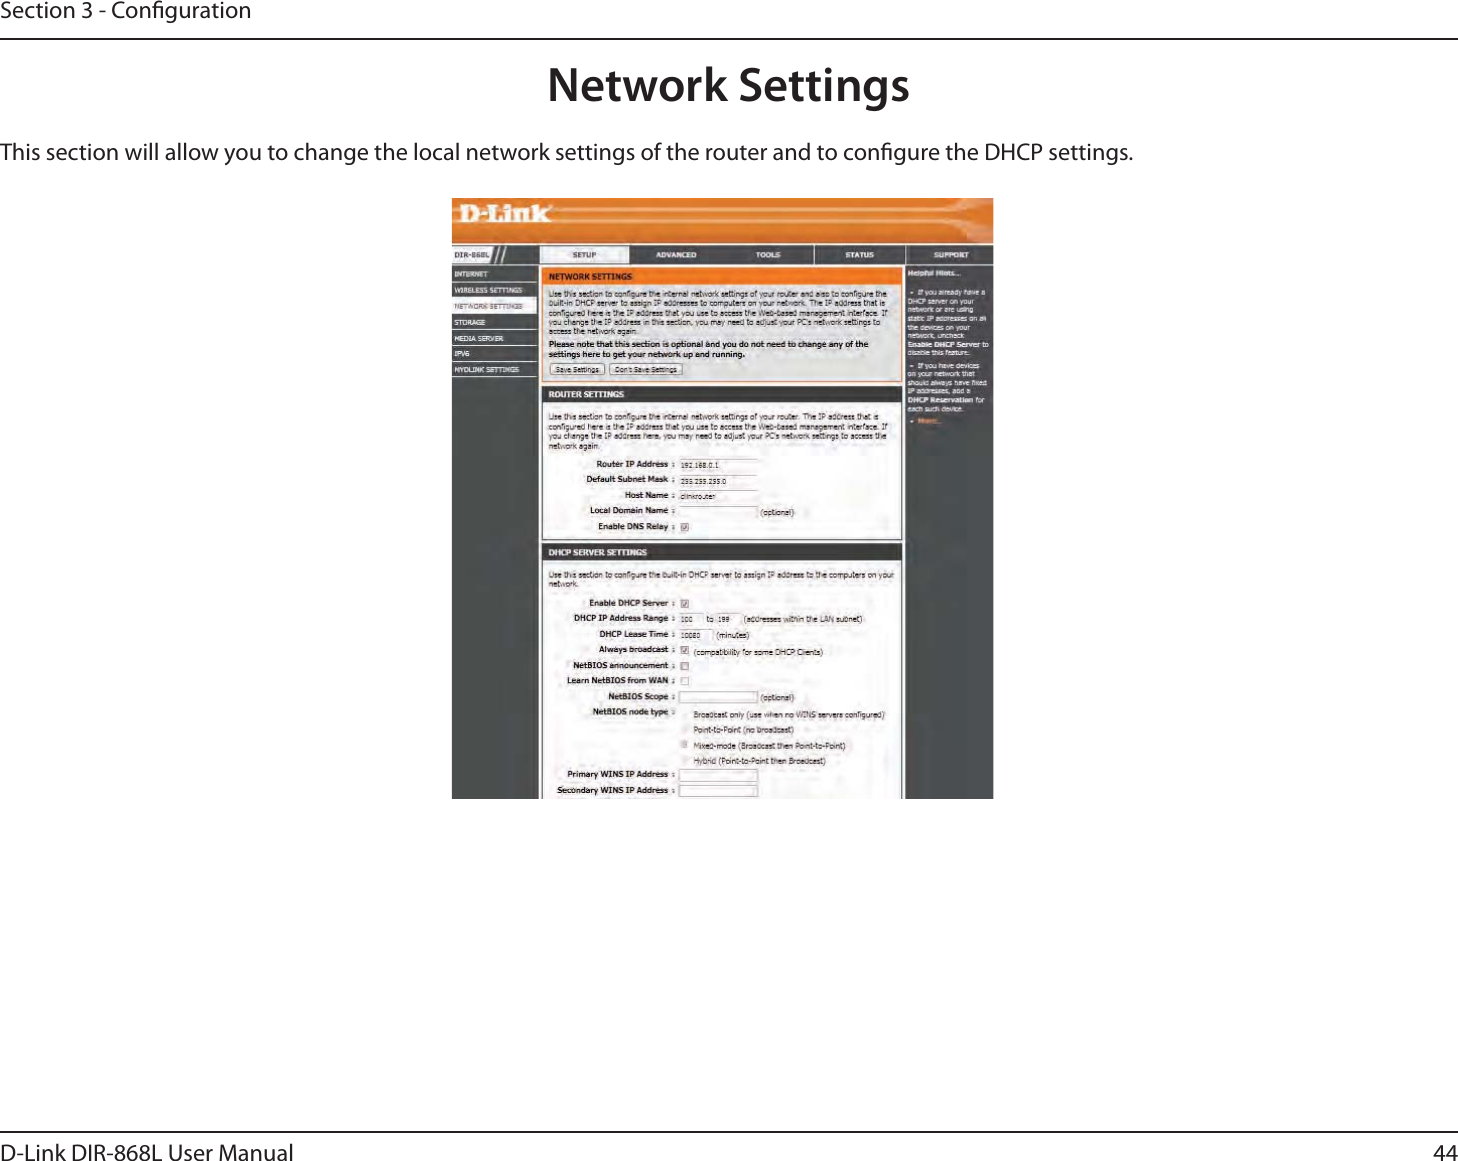 44D-Link DIR-868L User ManualSection 3 - CongurationThis section will allow you to change the local network settings of the router and to congure the DHCP settings.Network Settings